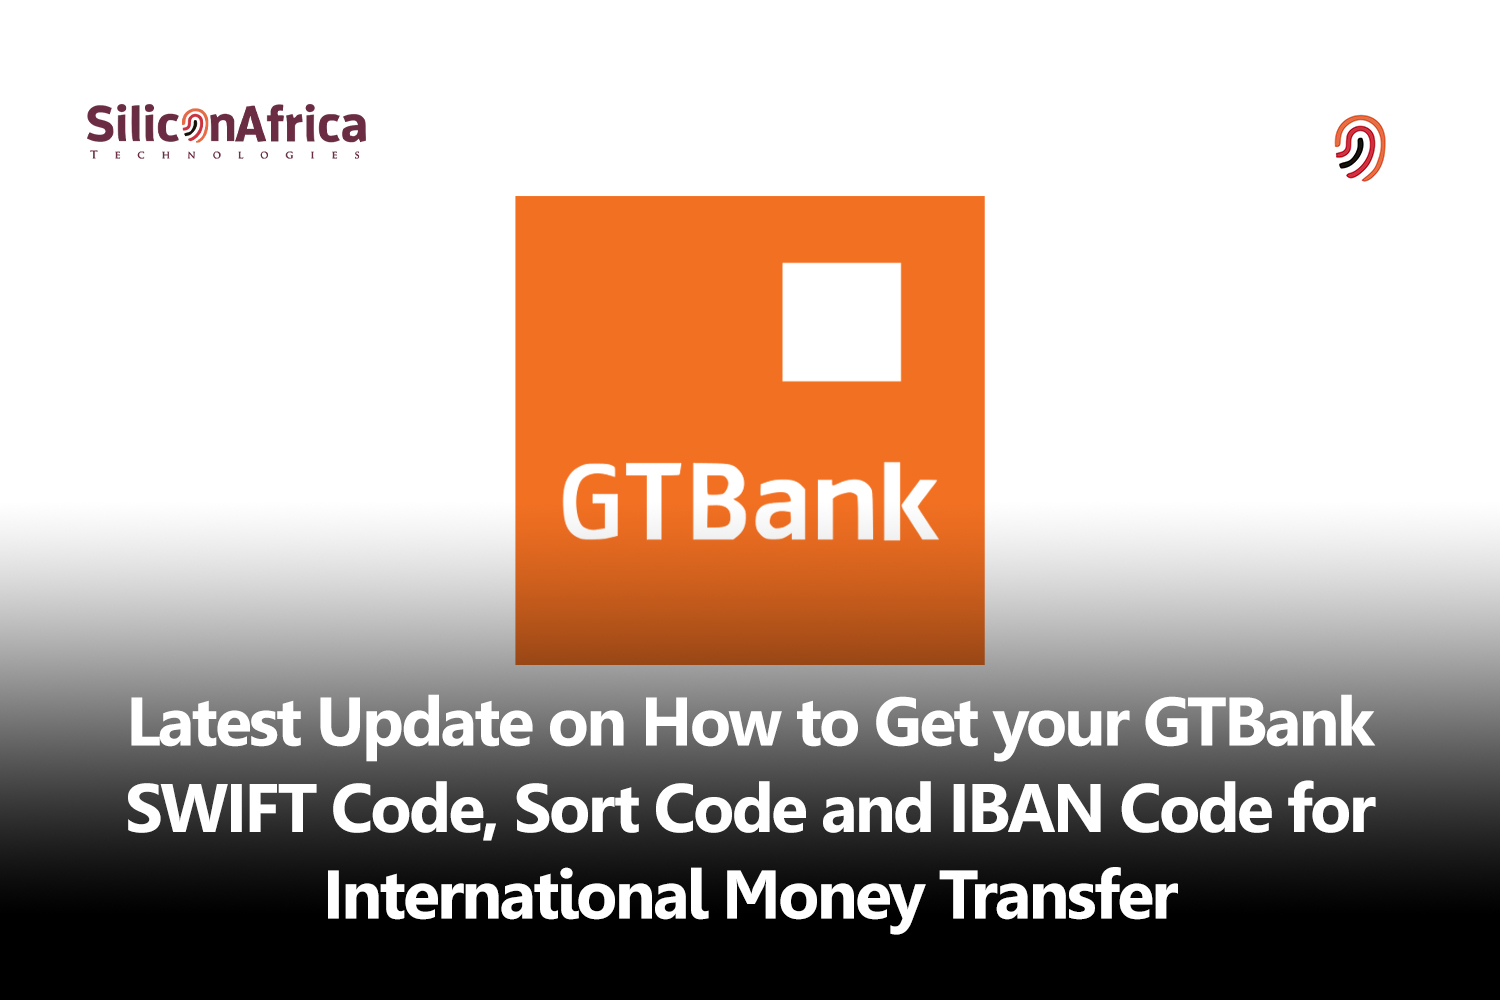 Latest Update on How to Get your GTBank SWIFT Code, Sort Code, and IBAN Code for International Money Transfer